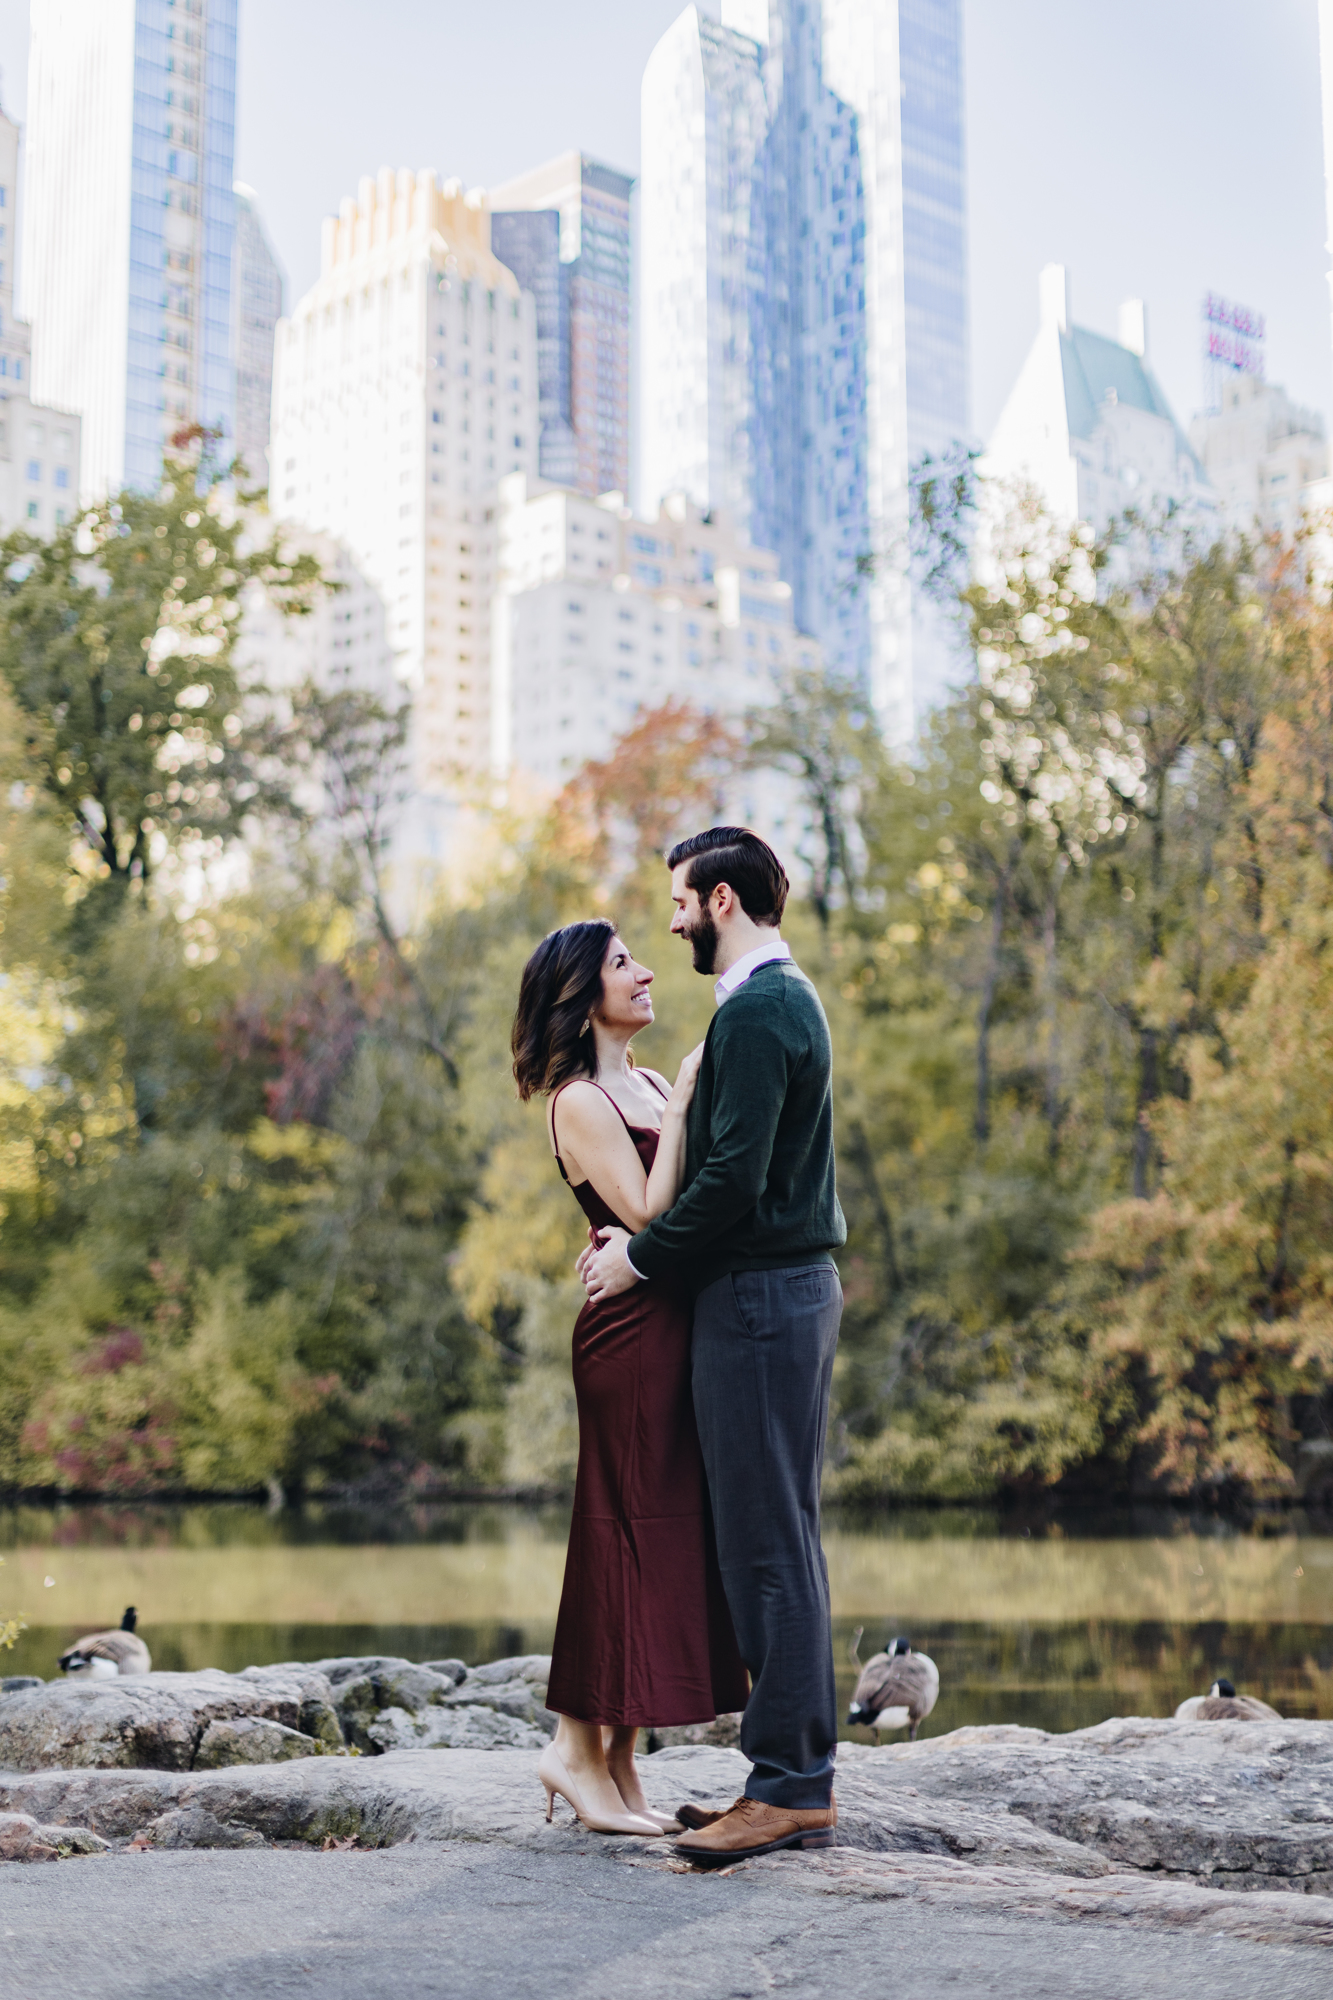 Touching Central Park Engagement Photos in Fall